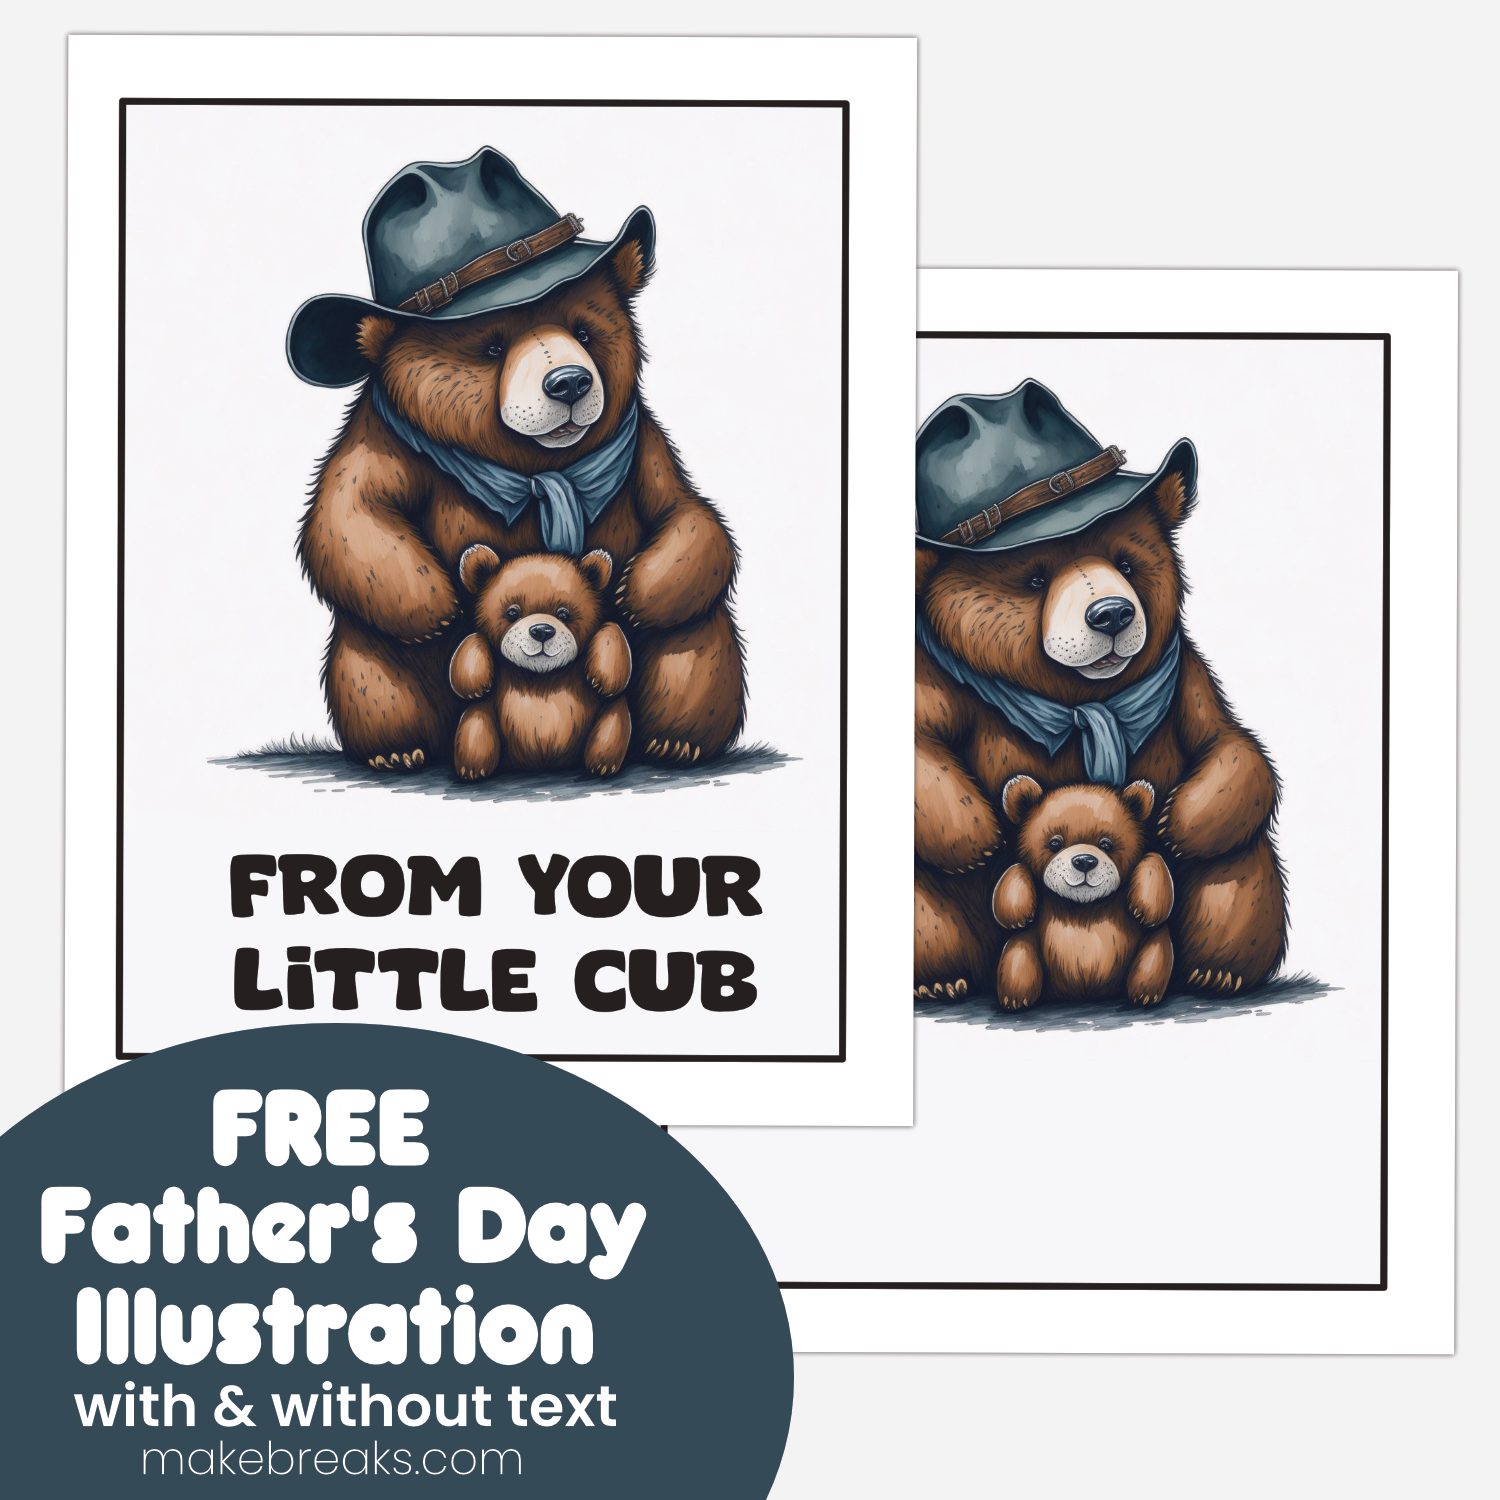 Free Printable Father’s Day Bear Illustration – From Your Little Cub